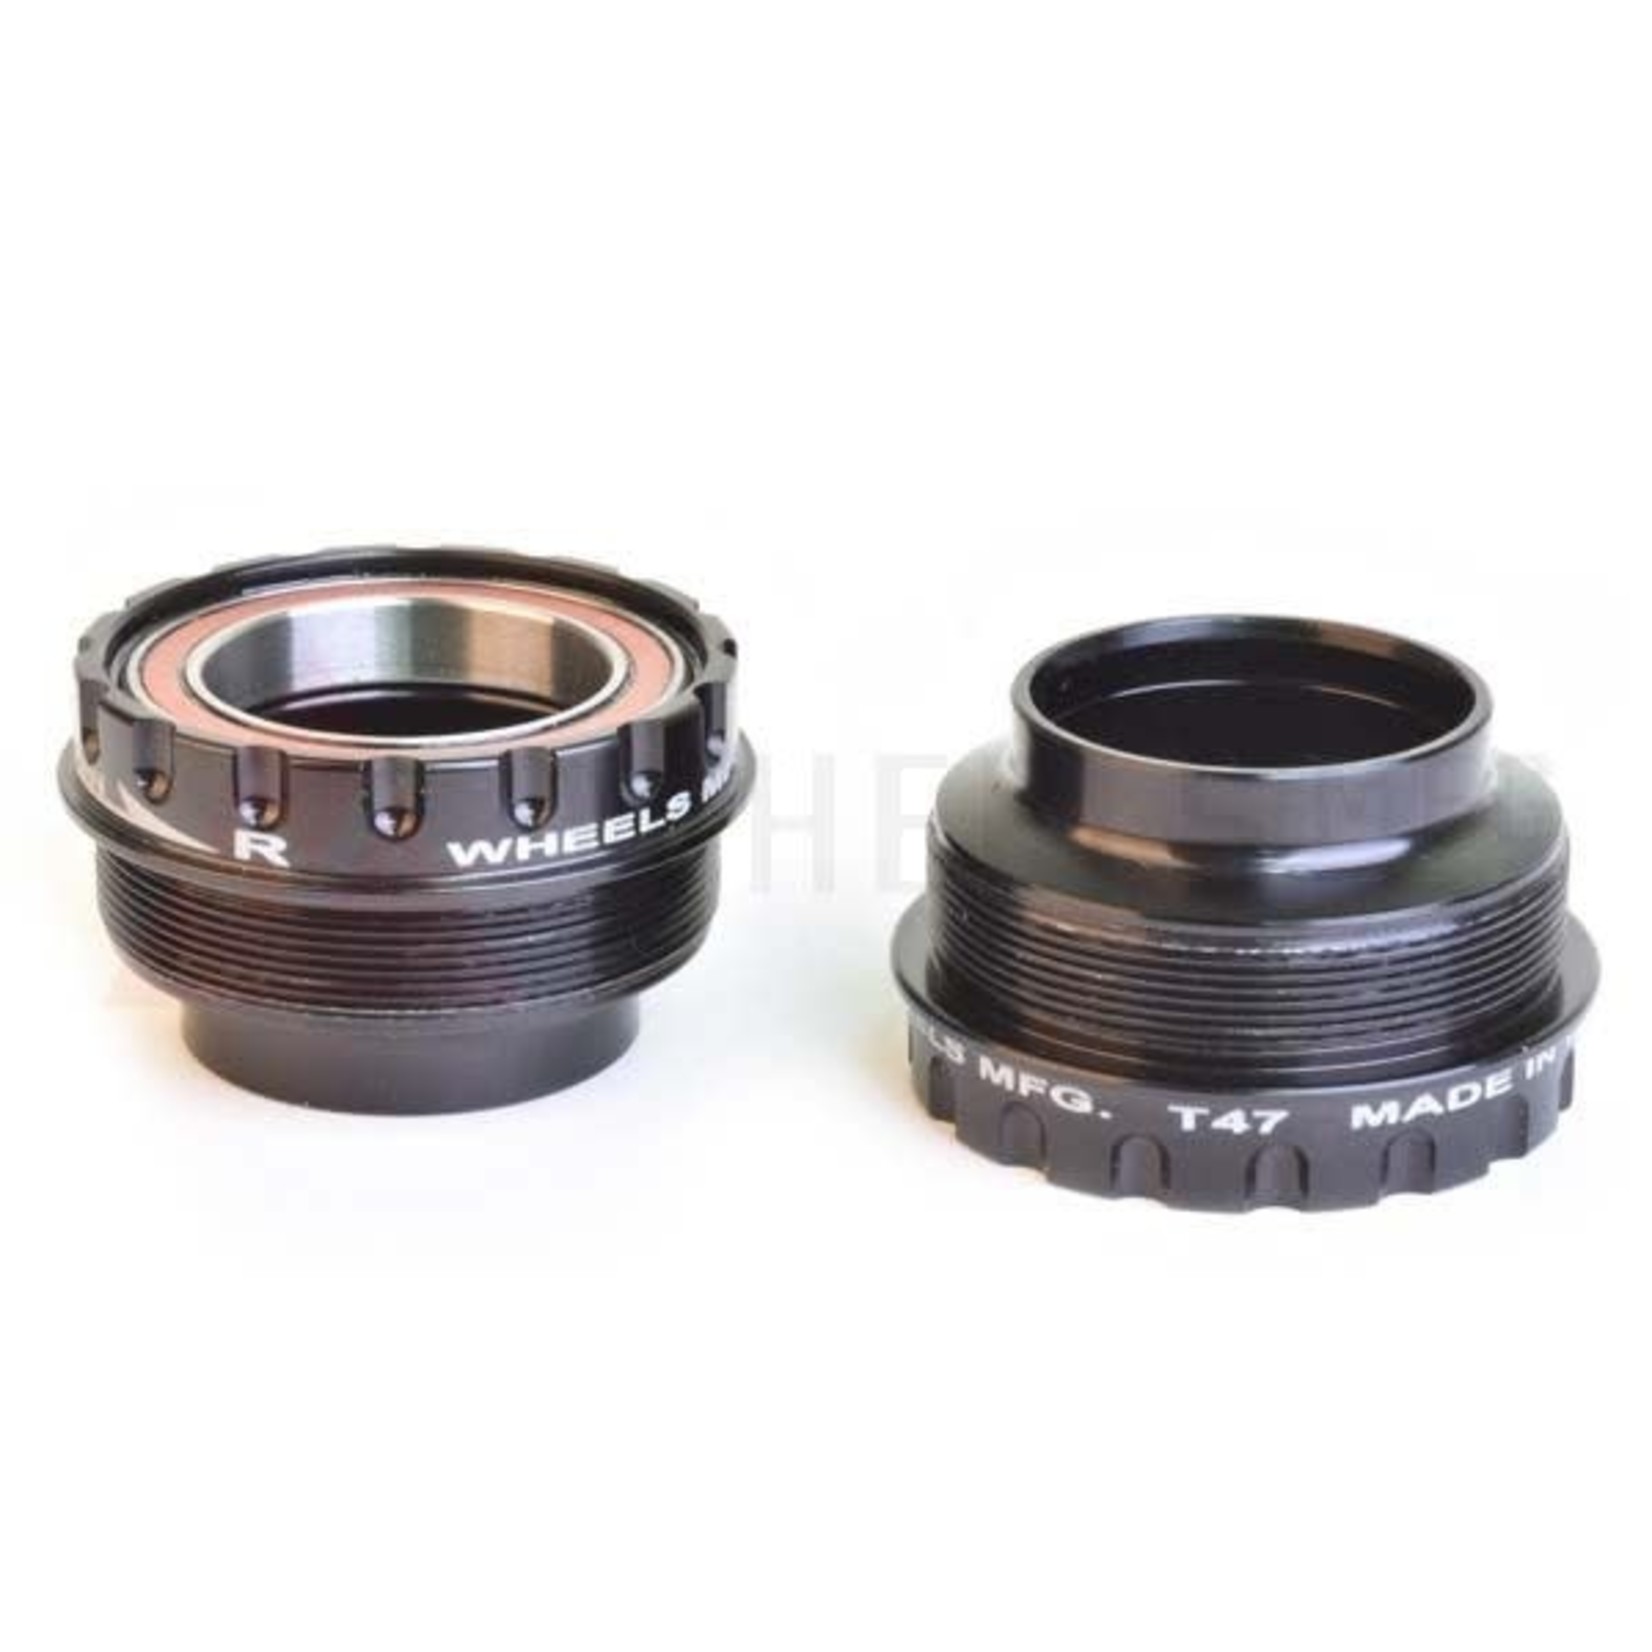 Wheels Manufacturing Wheels Mfg Bottom Bracket - T47 Outboard Angular Contact BB for 30mm Cranks